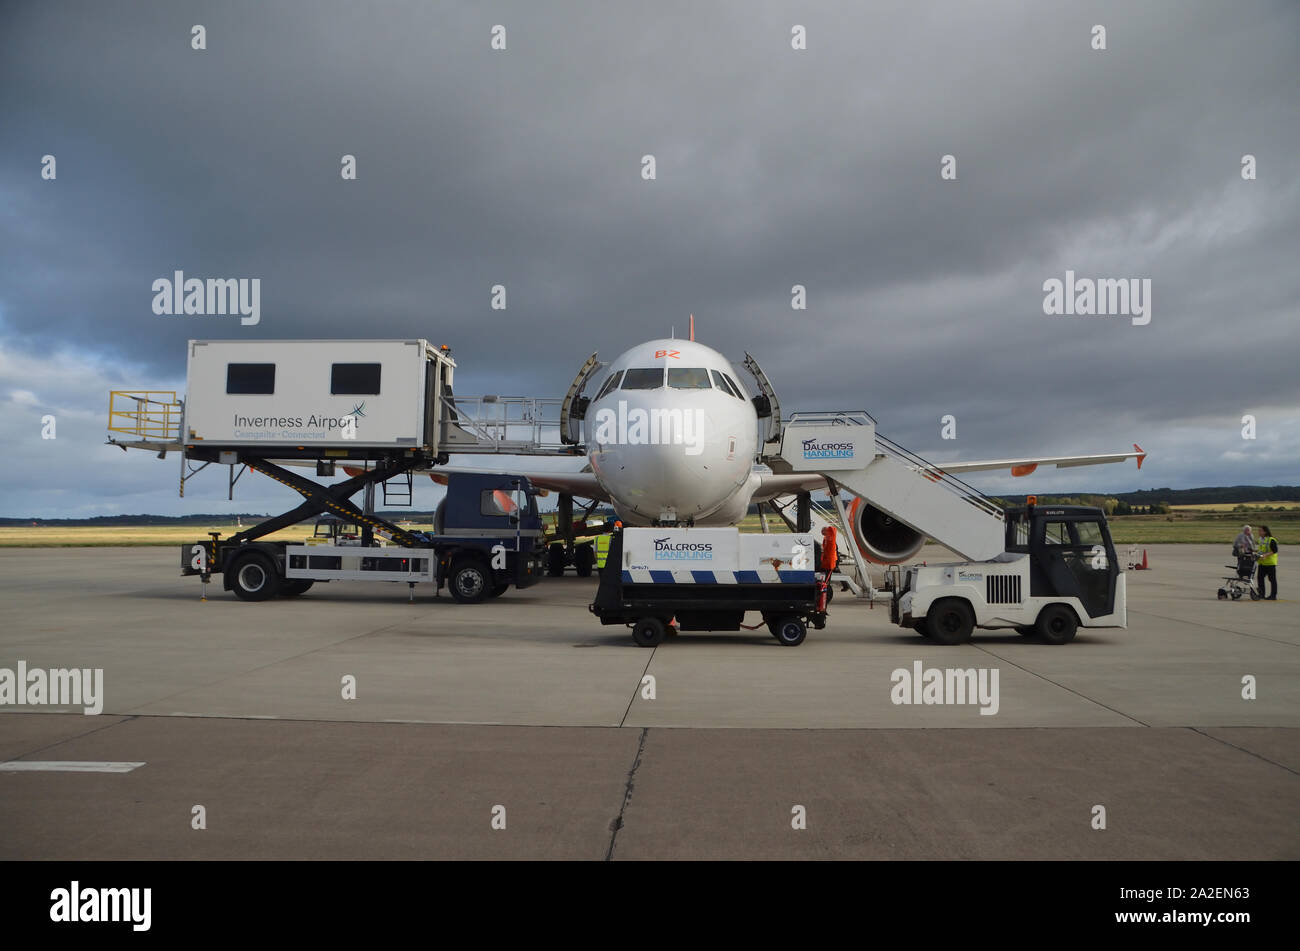 An EasyJet Airbus A319-111 parked on the concrete apron surrounded by various service vehicles at Inverness Dalcross Airport, Scottish Highlands, UK. Stock Photo